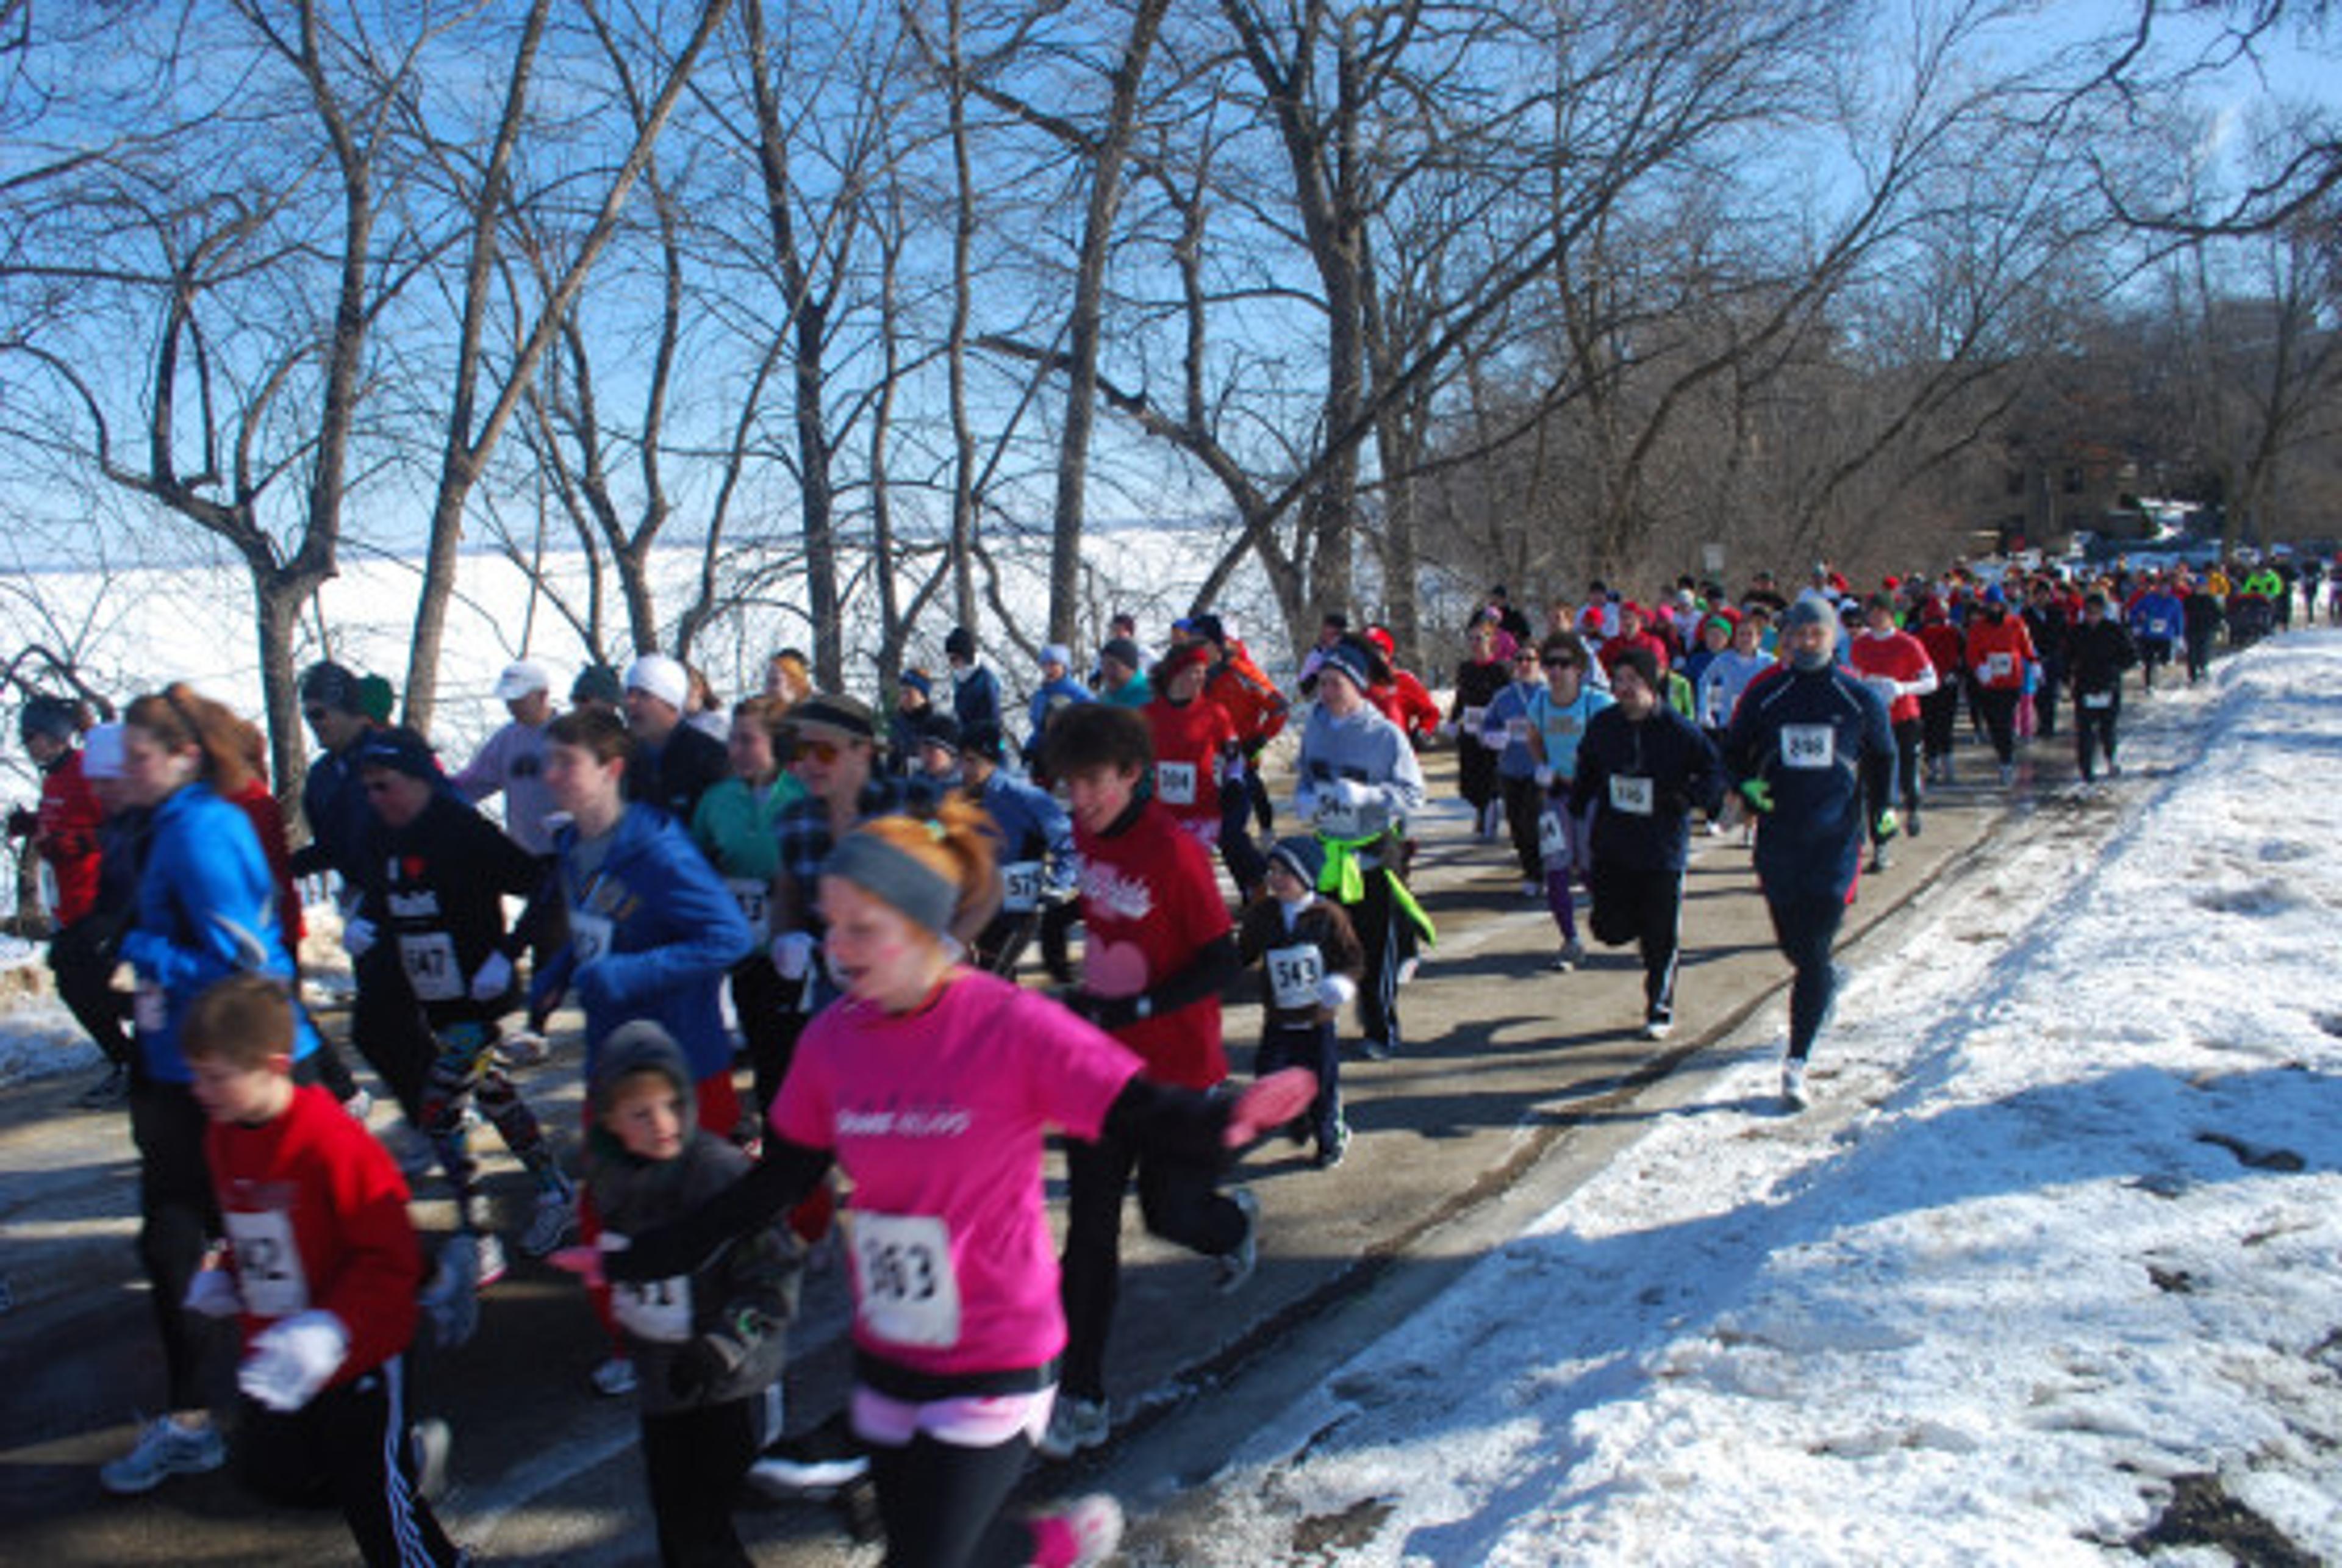 A healthy way to ring in 2014: New Year's Eve Run